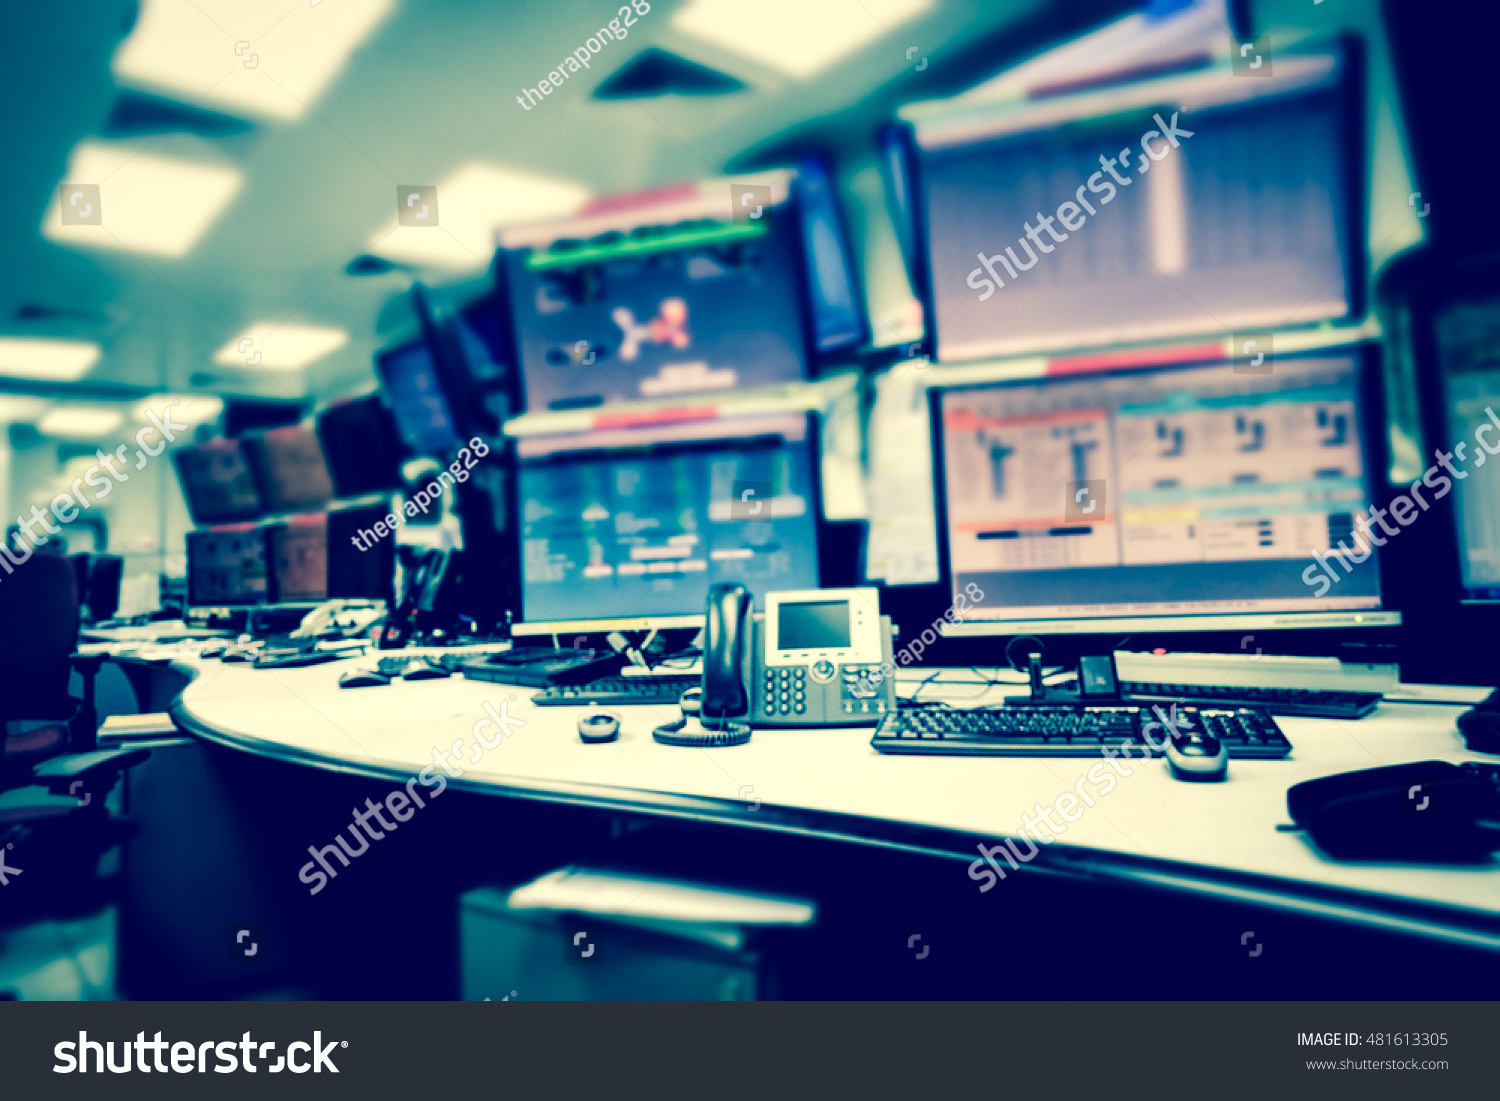 Plant control room and computer monitors for operate and monitor process in miniature and blurring tone with vintage style. #481613305